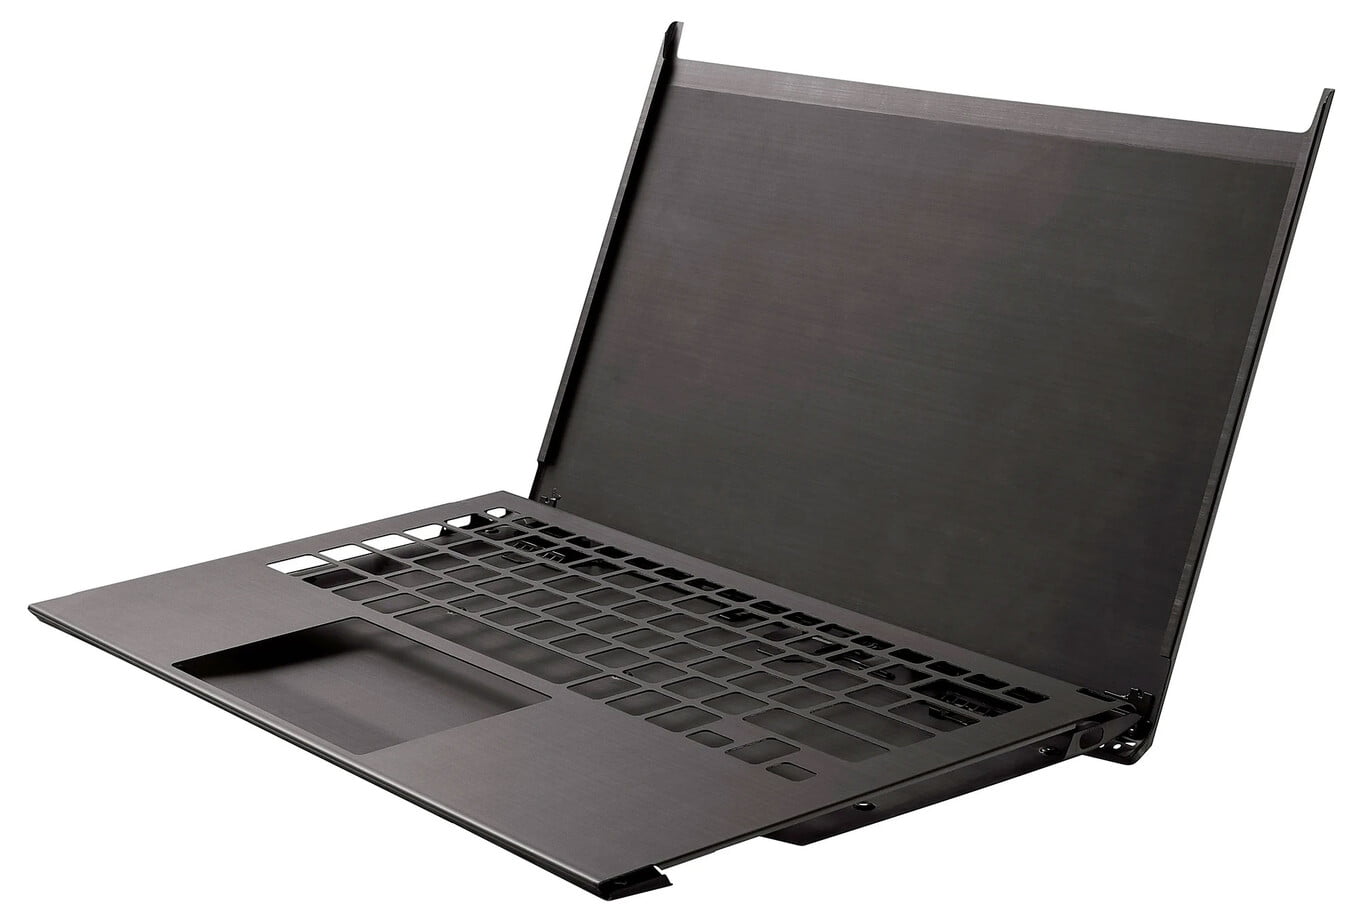 VAIO Z returns with 3D molded carbon fiber body: specs, price and release date